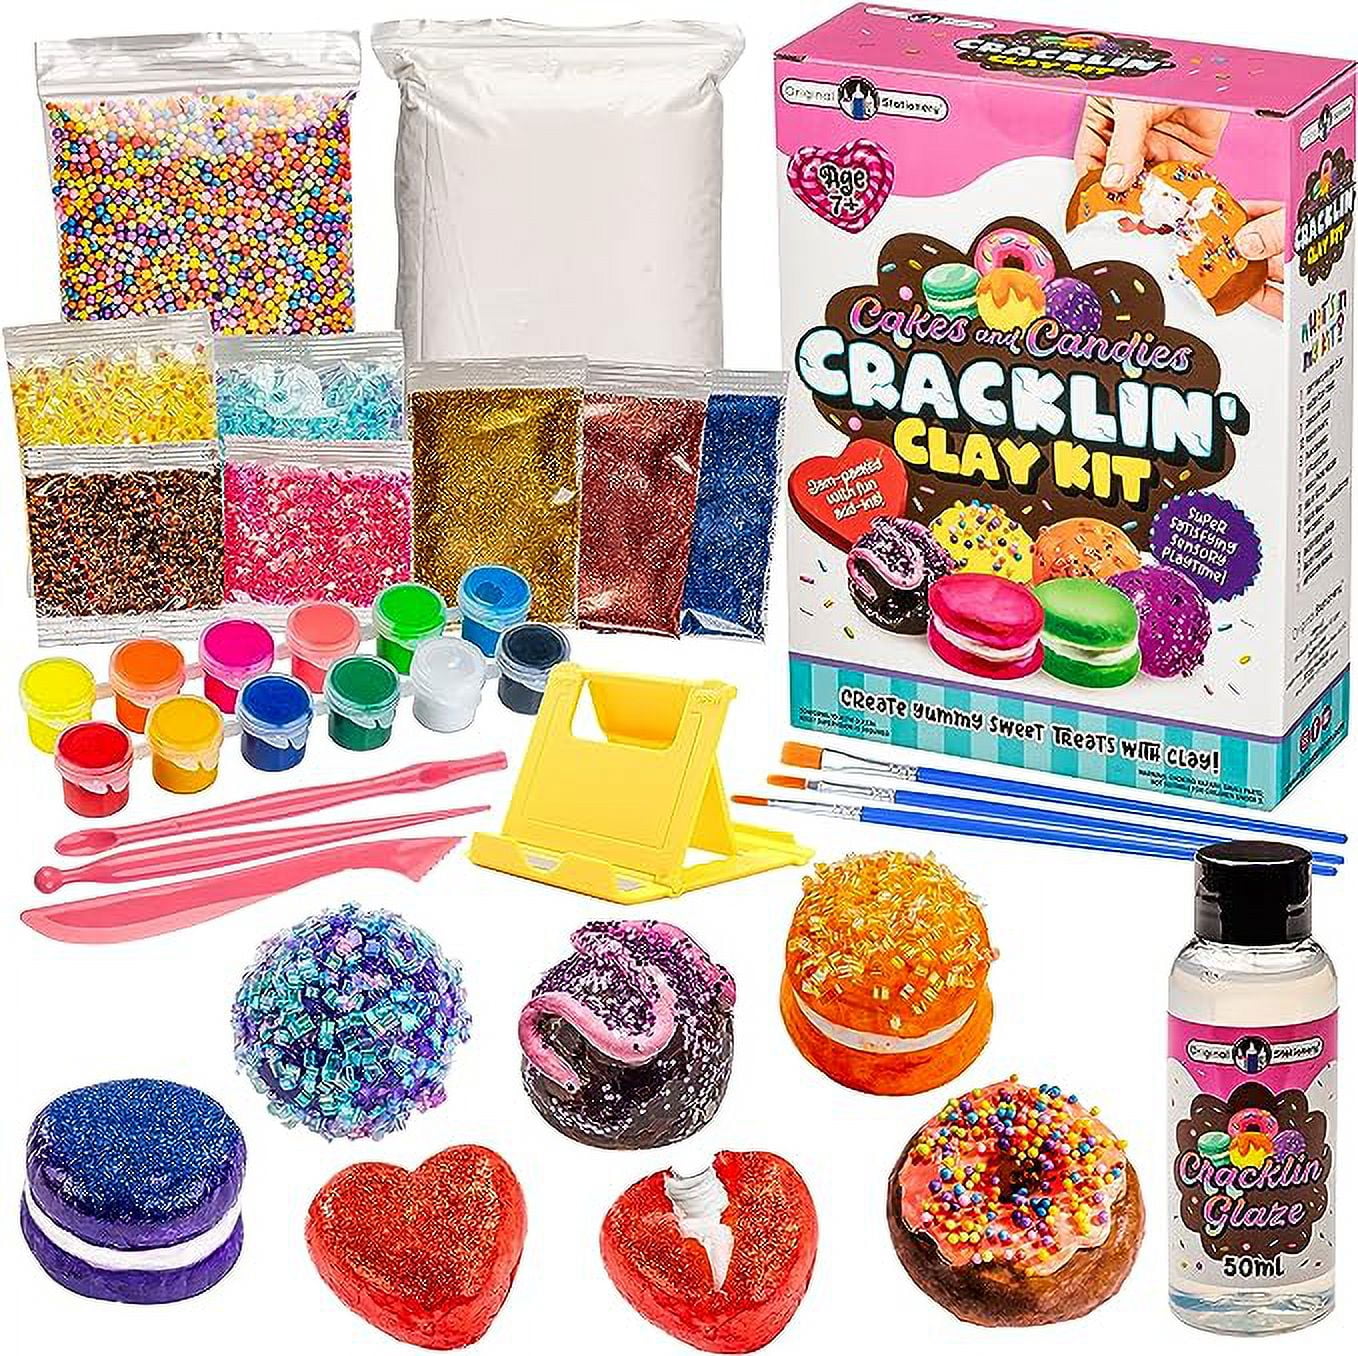 Cakes and Candies Cracklin' Clay Kit